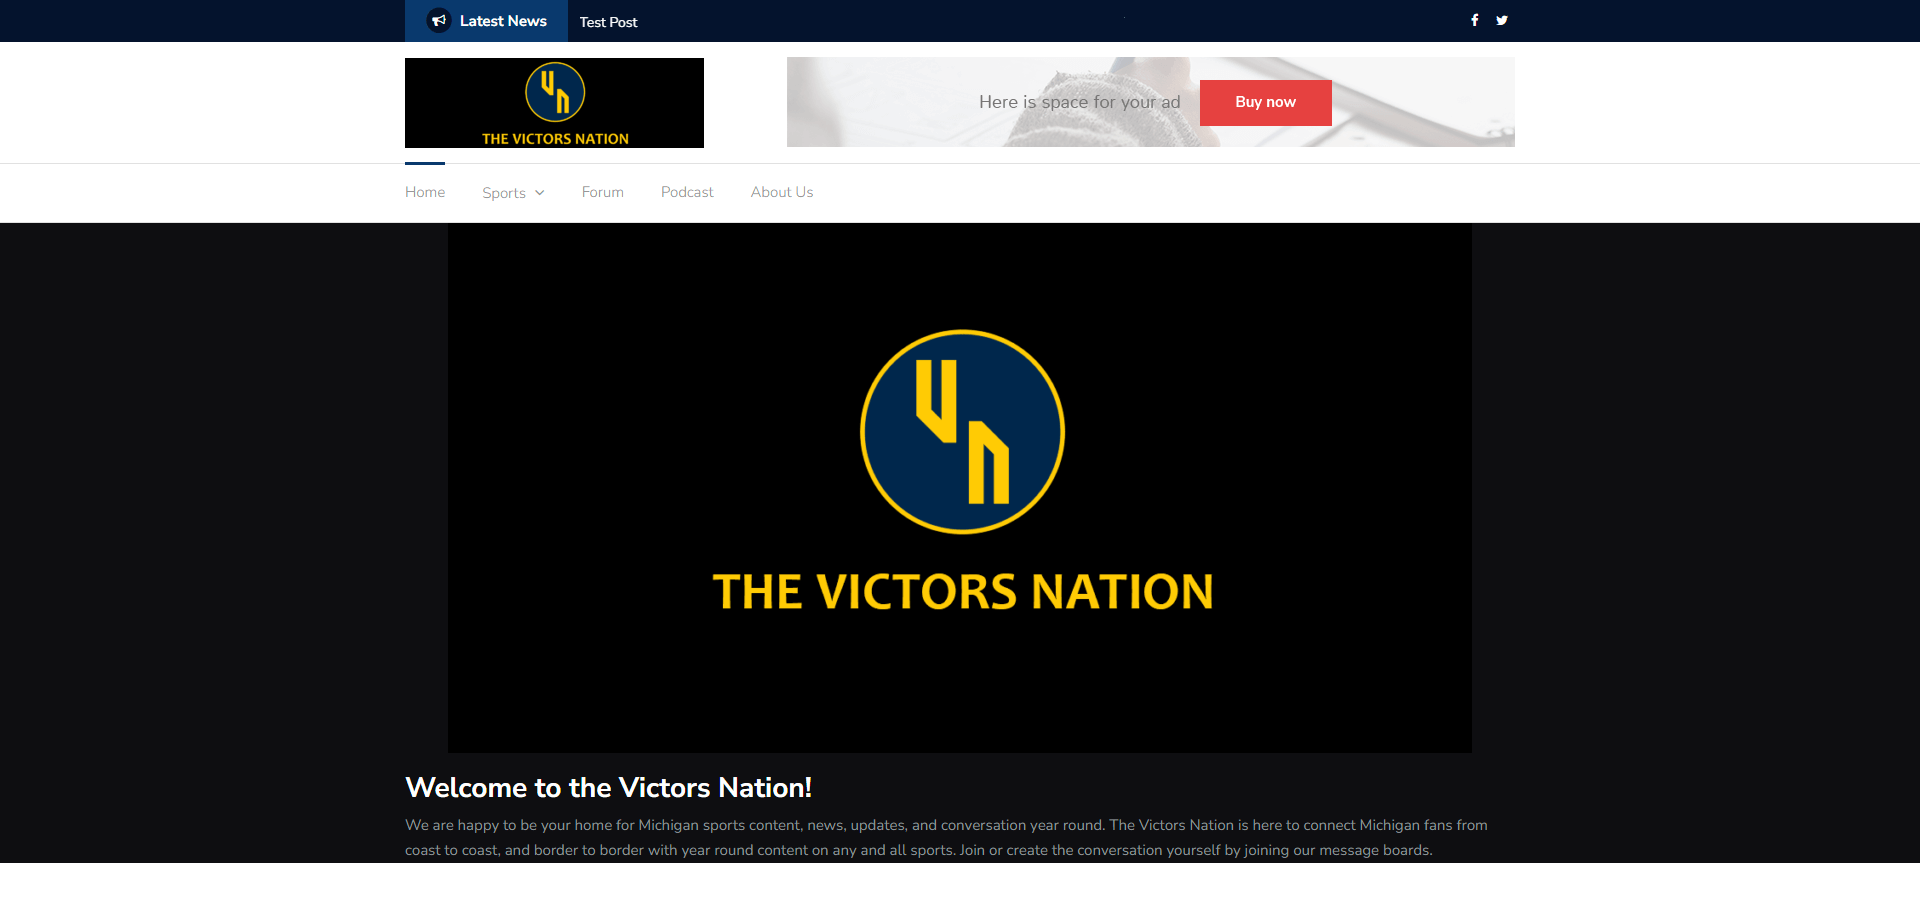 Initial view of Victors Nation page